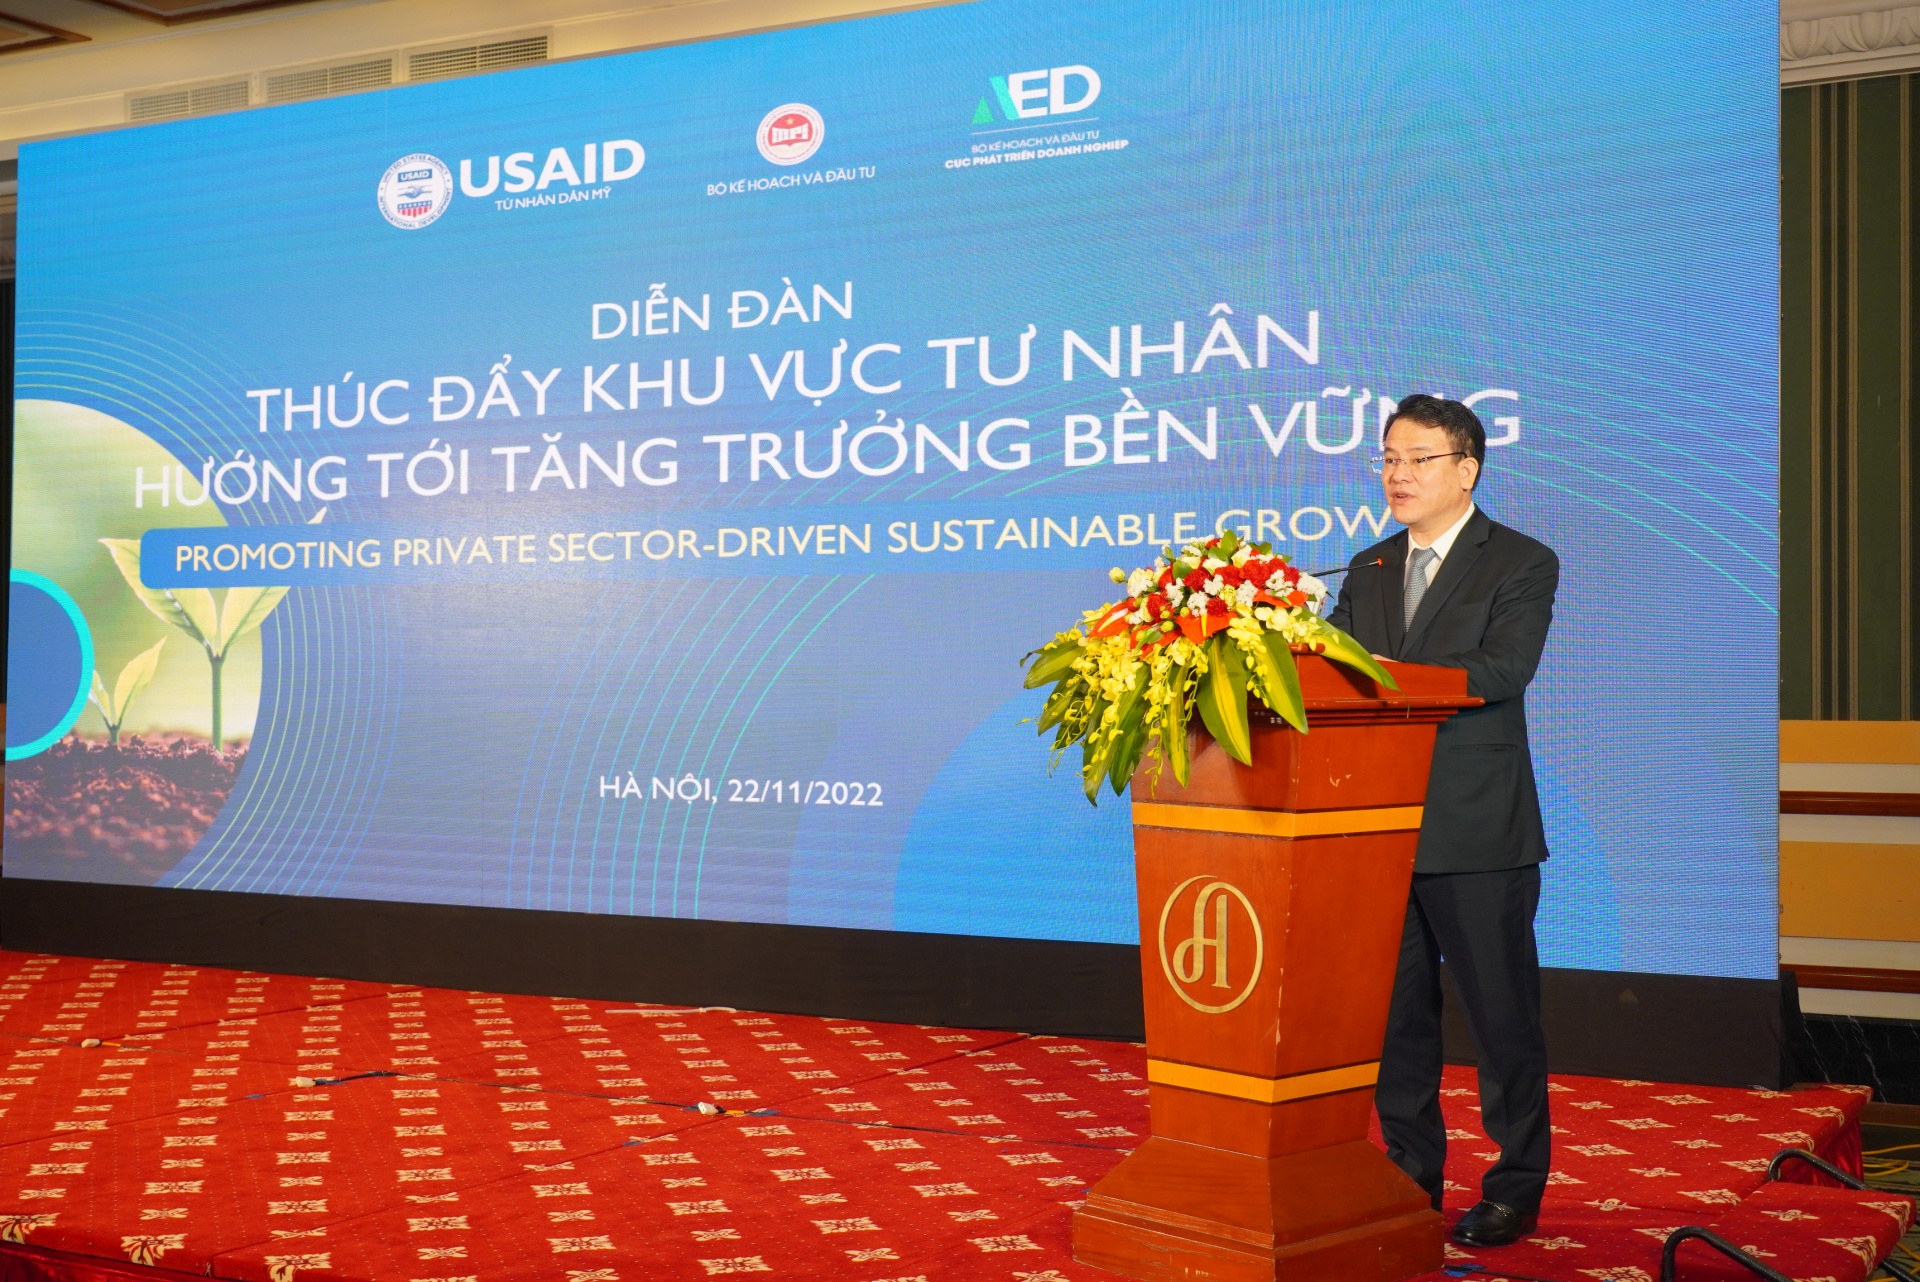 Forum highlights private sector-driven sustainable growth in Vietnam